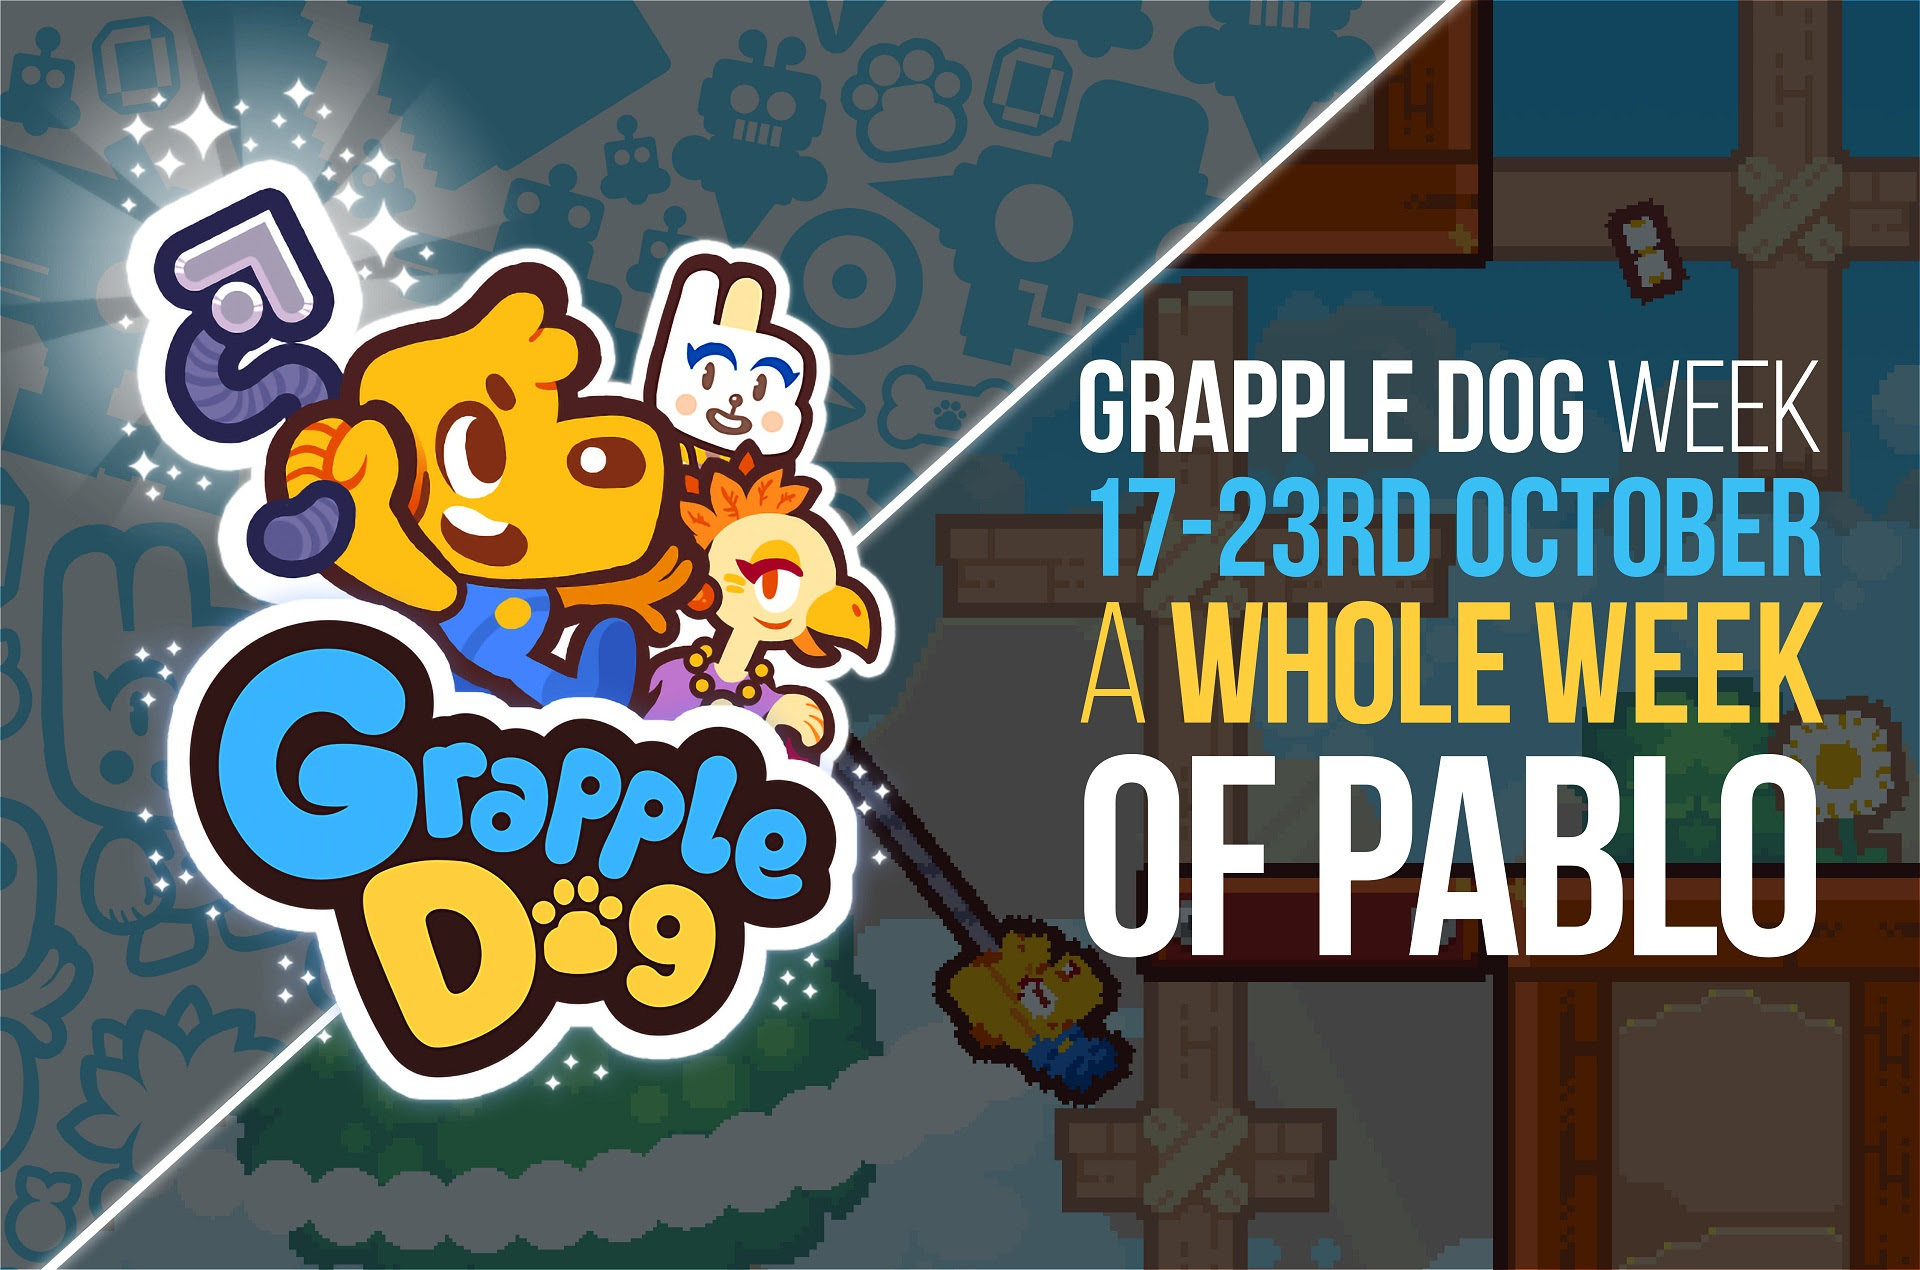 A main asset for Grapple Dog week. The image background has an in-game gameplay screenshot and some game-related print. Over that there's the Grapple Dog logo along with the text "Grapple Dog Week - 17-23rd October - A whole week of Pablo"